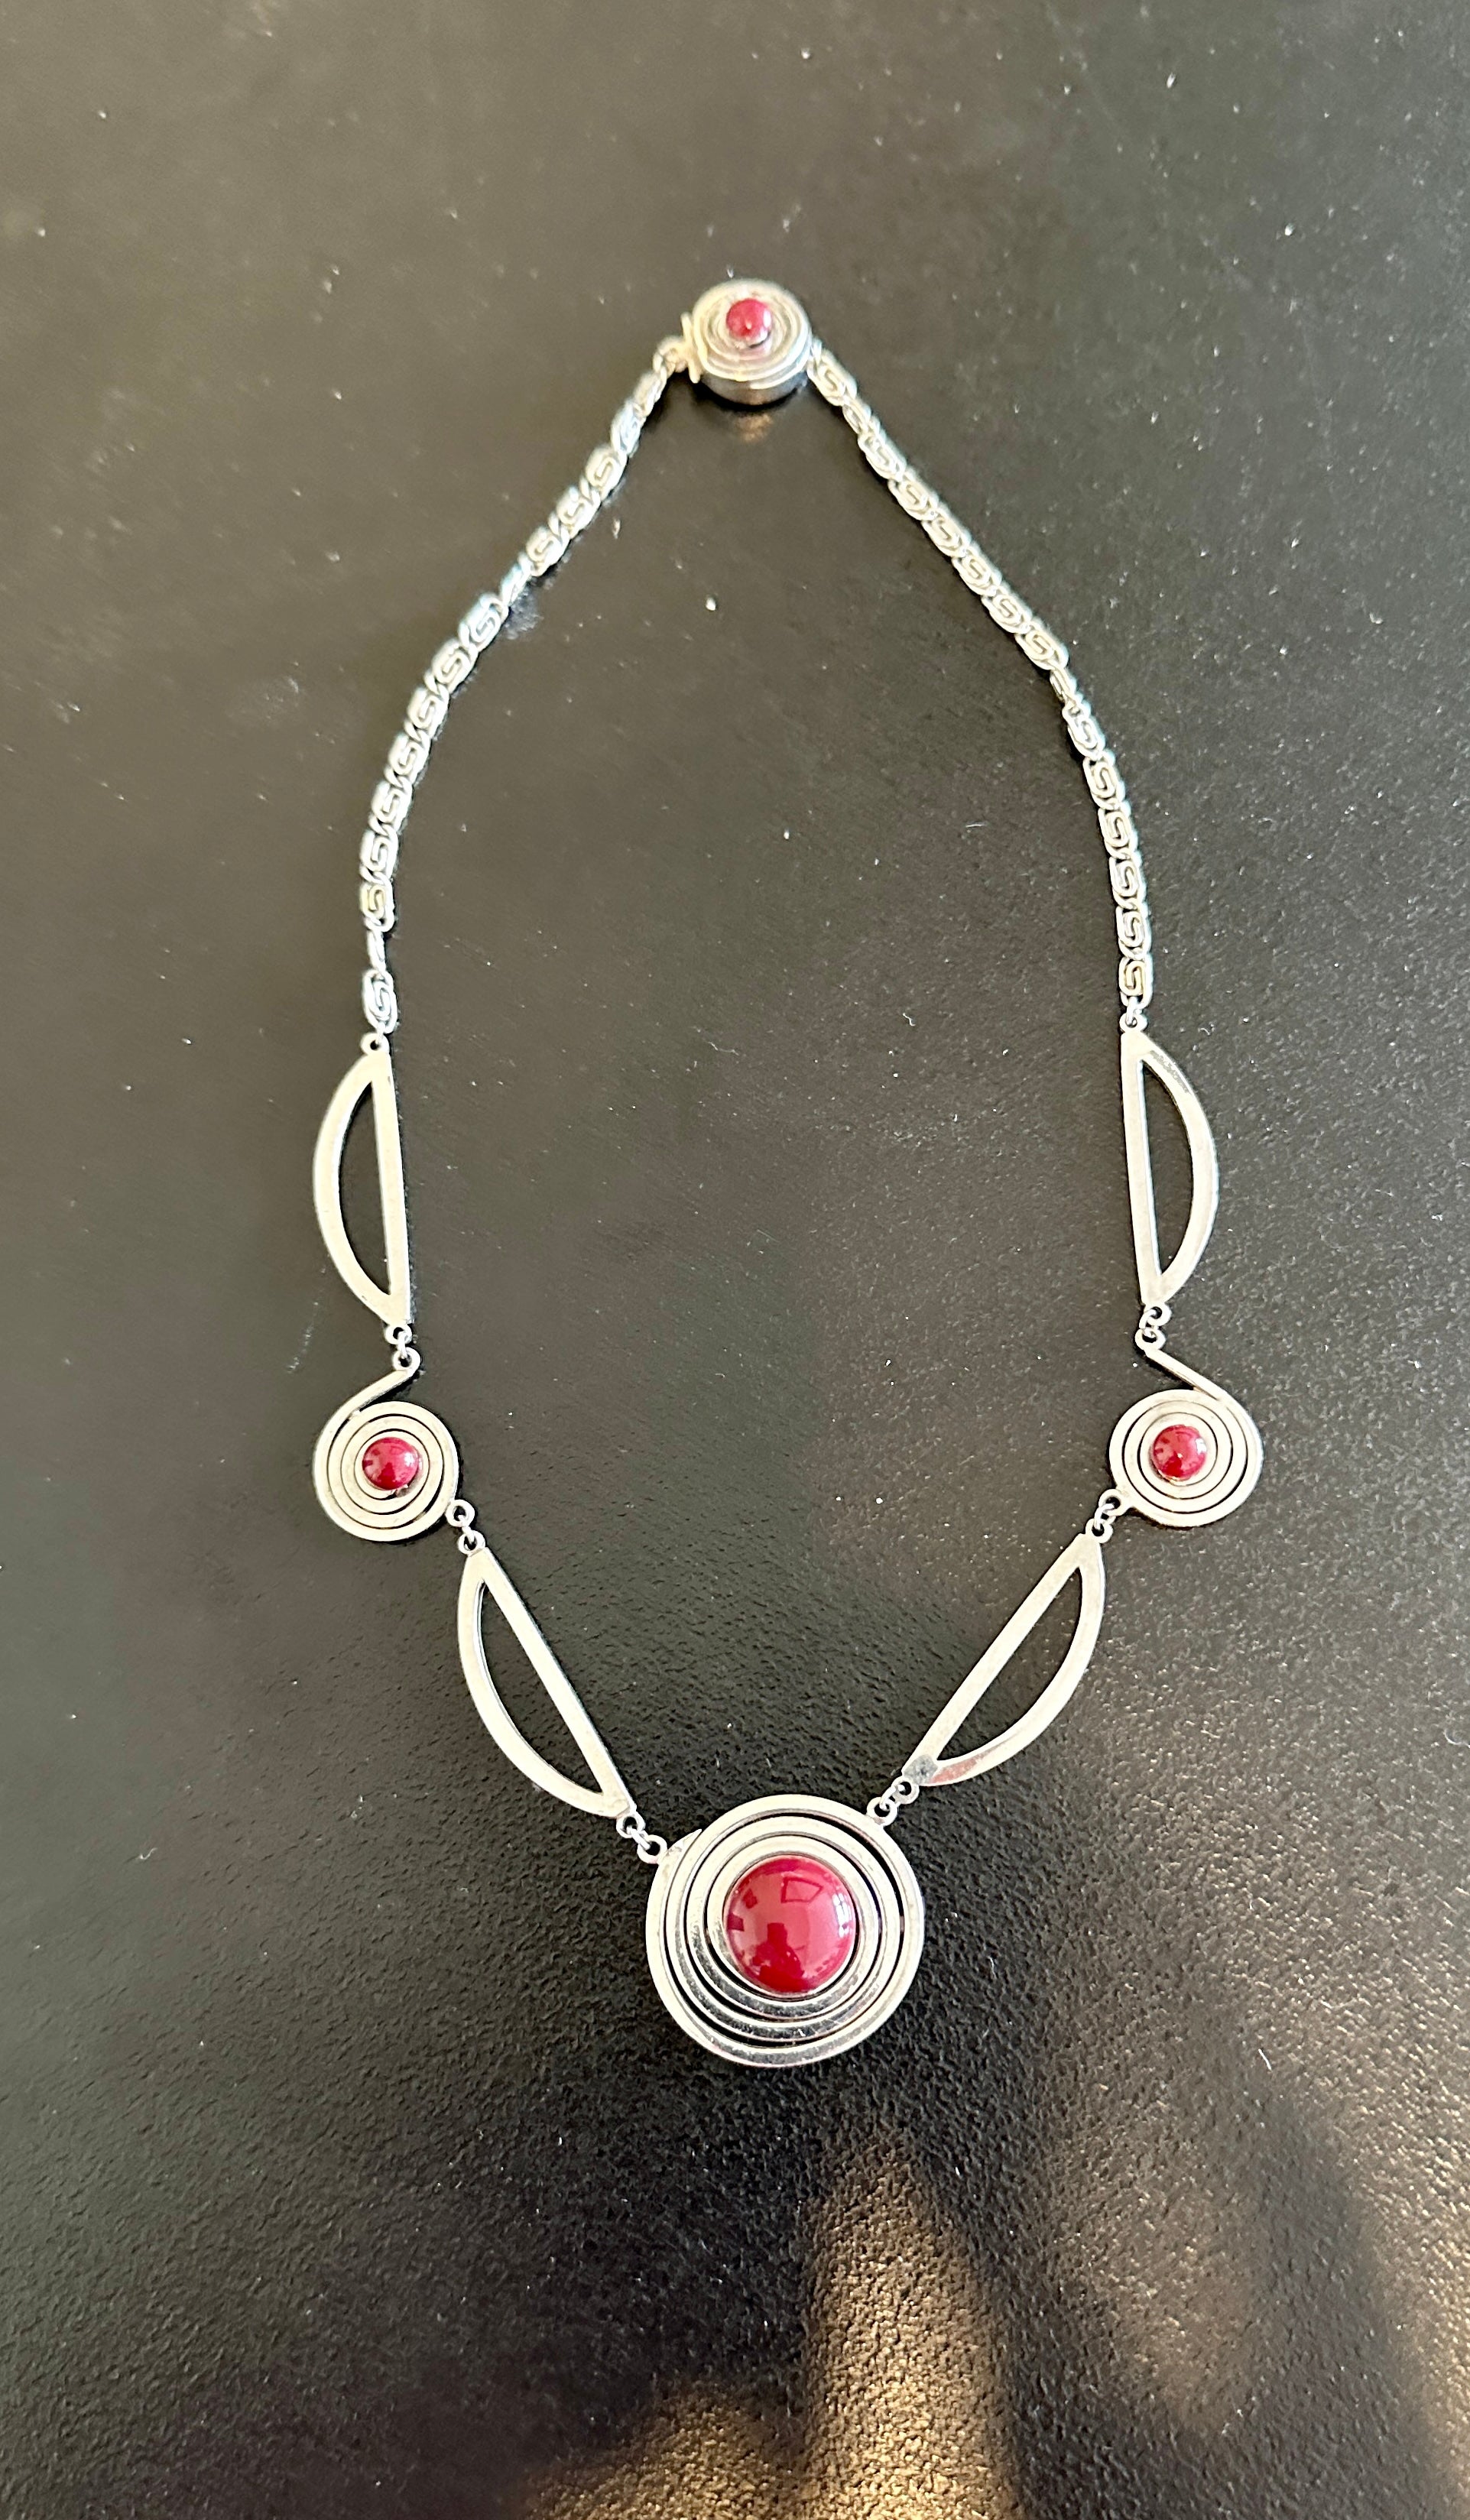 Indulge in a magnificent rare antique Art Deco Chrome Machine Age Necklace with fabulous geometric design and red Galalith adornments.  The necklace is in the style of Jakob Bengel but is not signed.  The necklace is the epitome of Art Deco jewelry